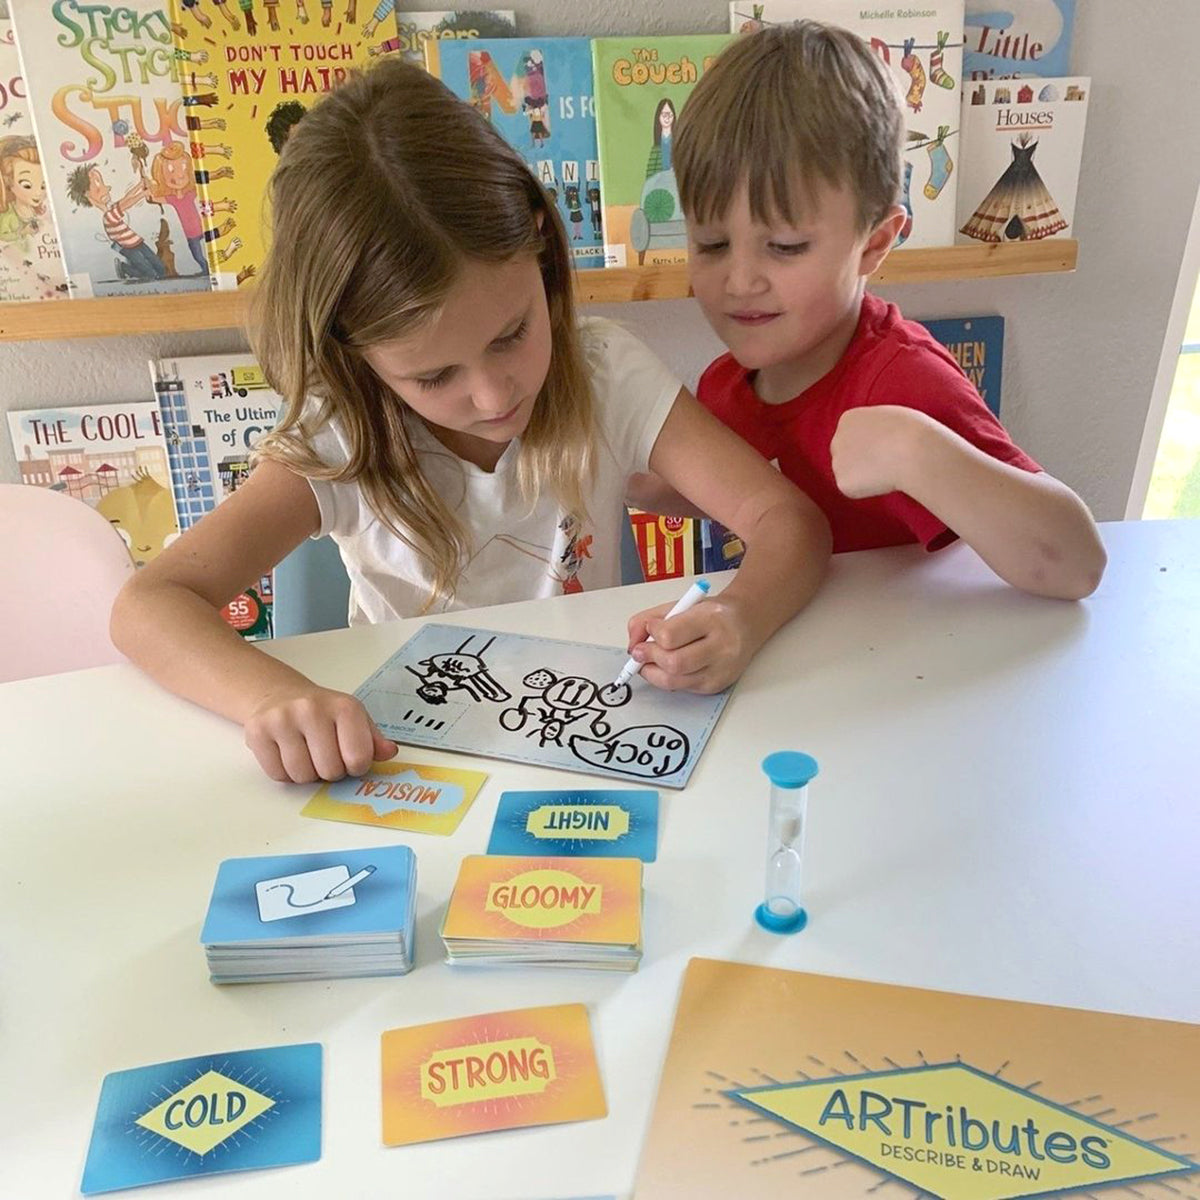 ARTributes by SimplyFun is a fun drawing game for ages 7 and up